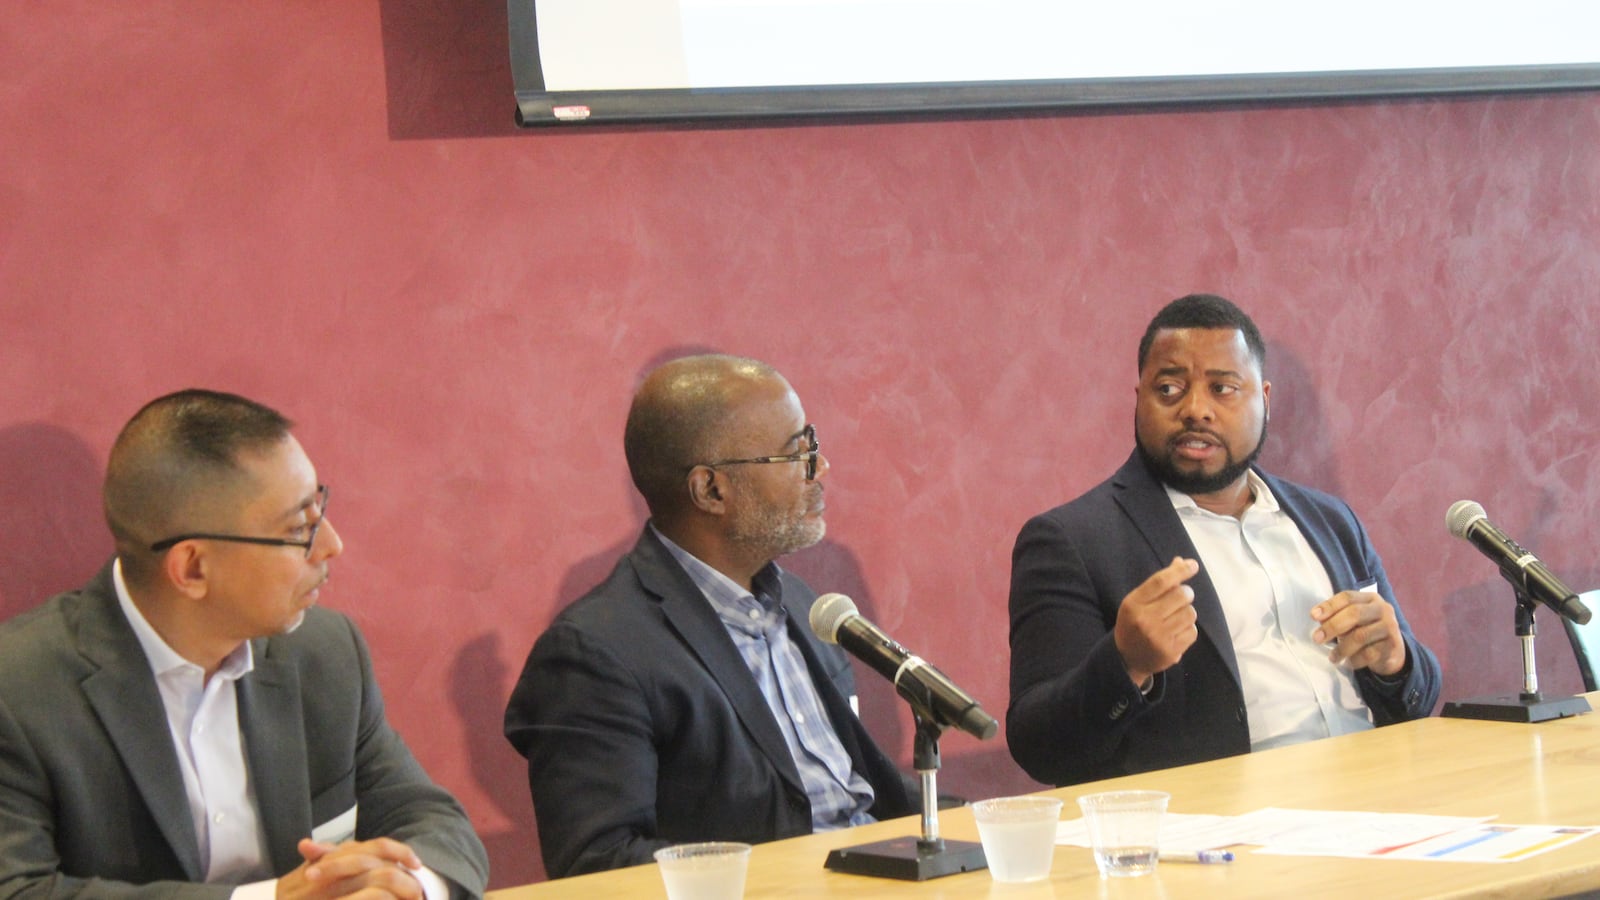 Chicago Public Schools' Chief Equity Officer, Maurice Swinney (far right), spoke on a panel about addressing trauma in youth. Also pictured, from left, are panelists Eddie Bocanegra and Bryan Samuels.